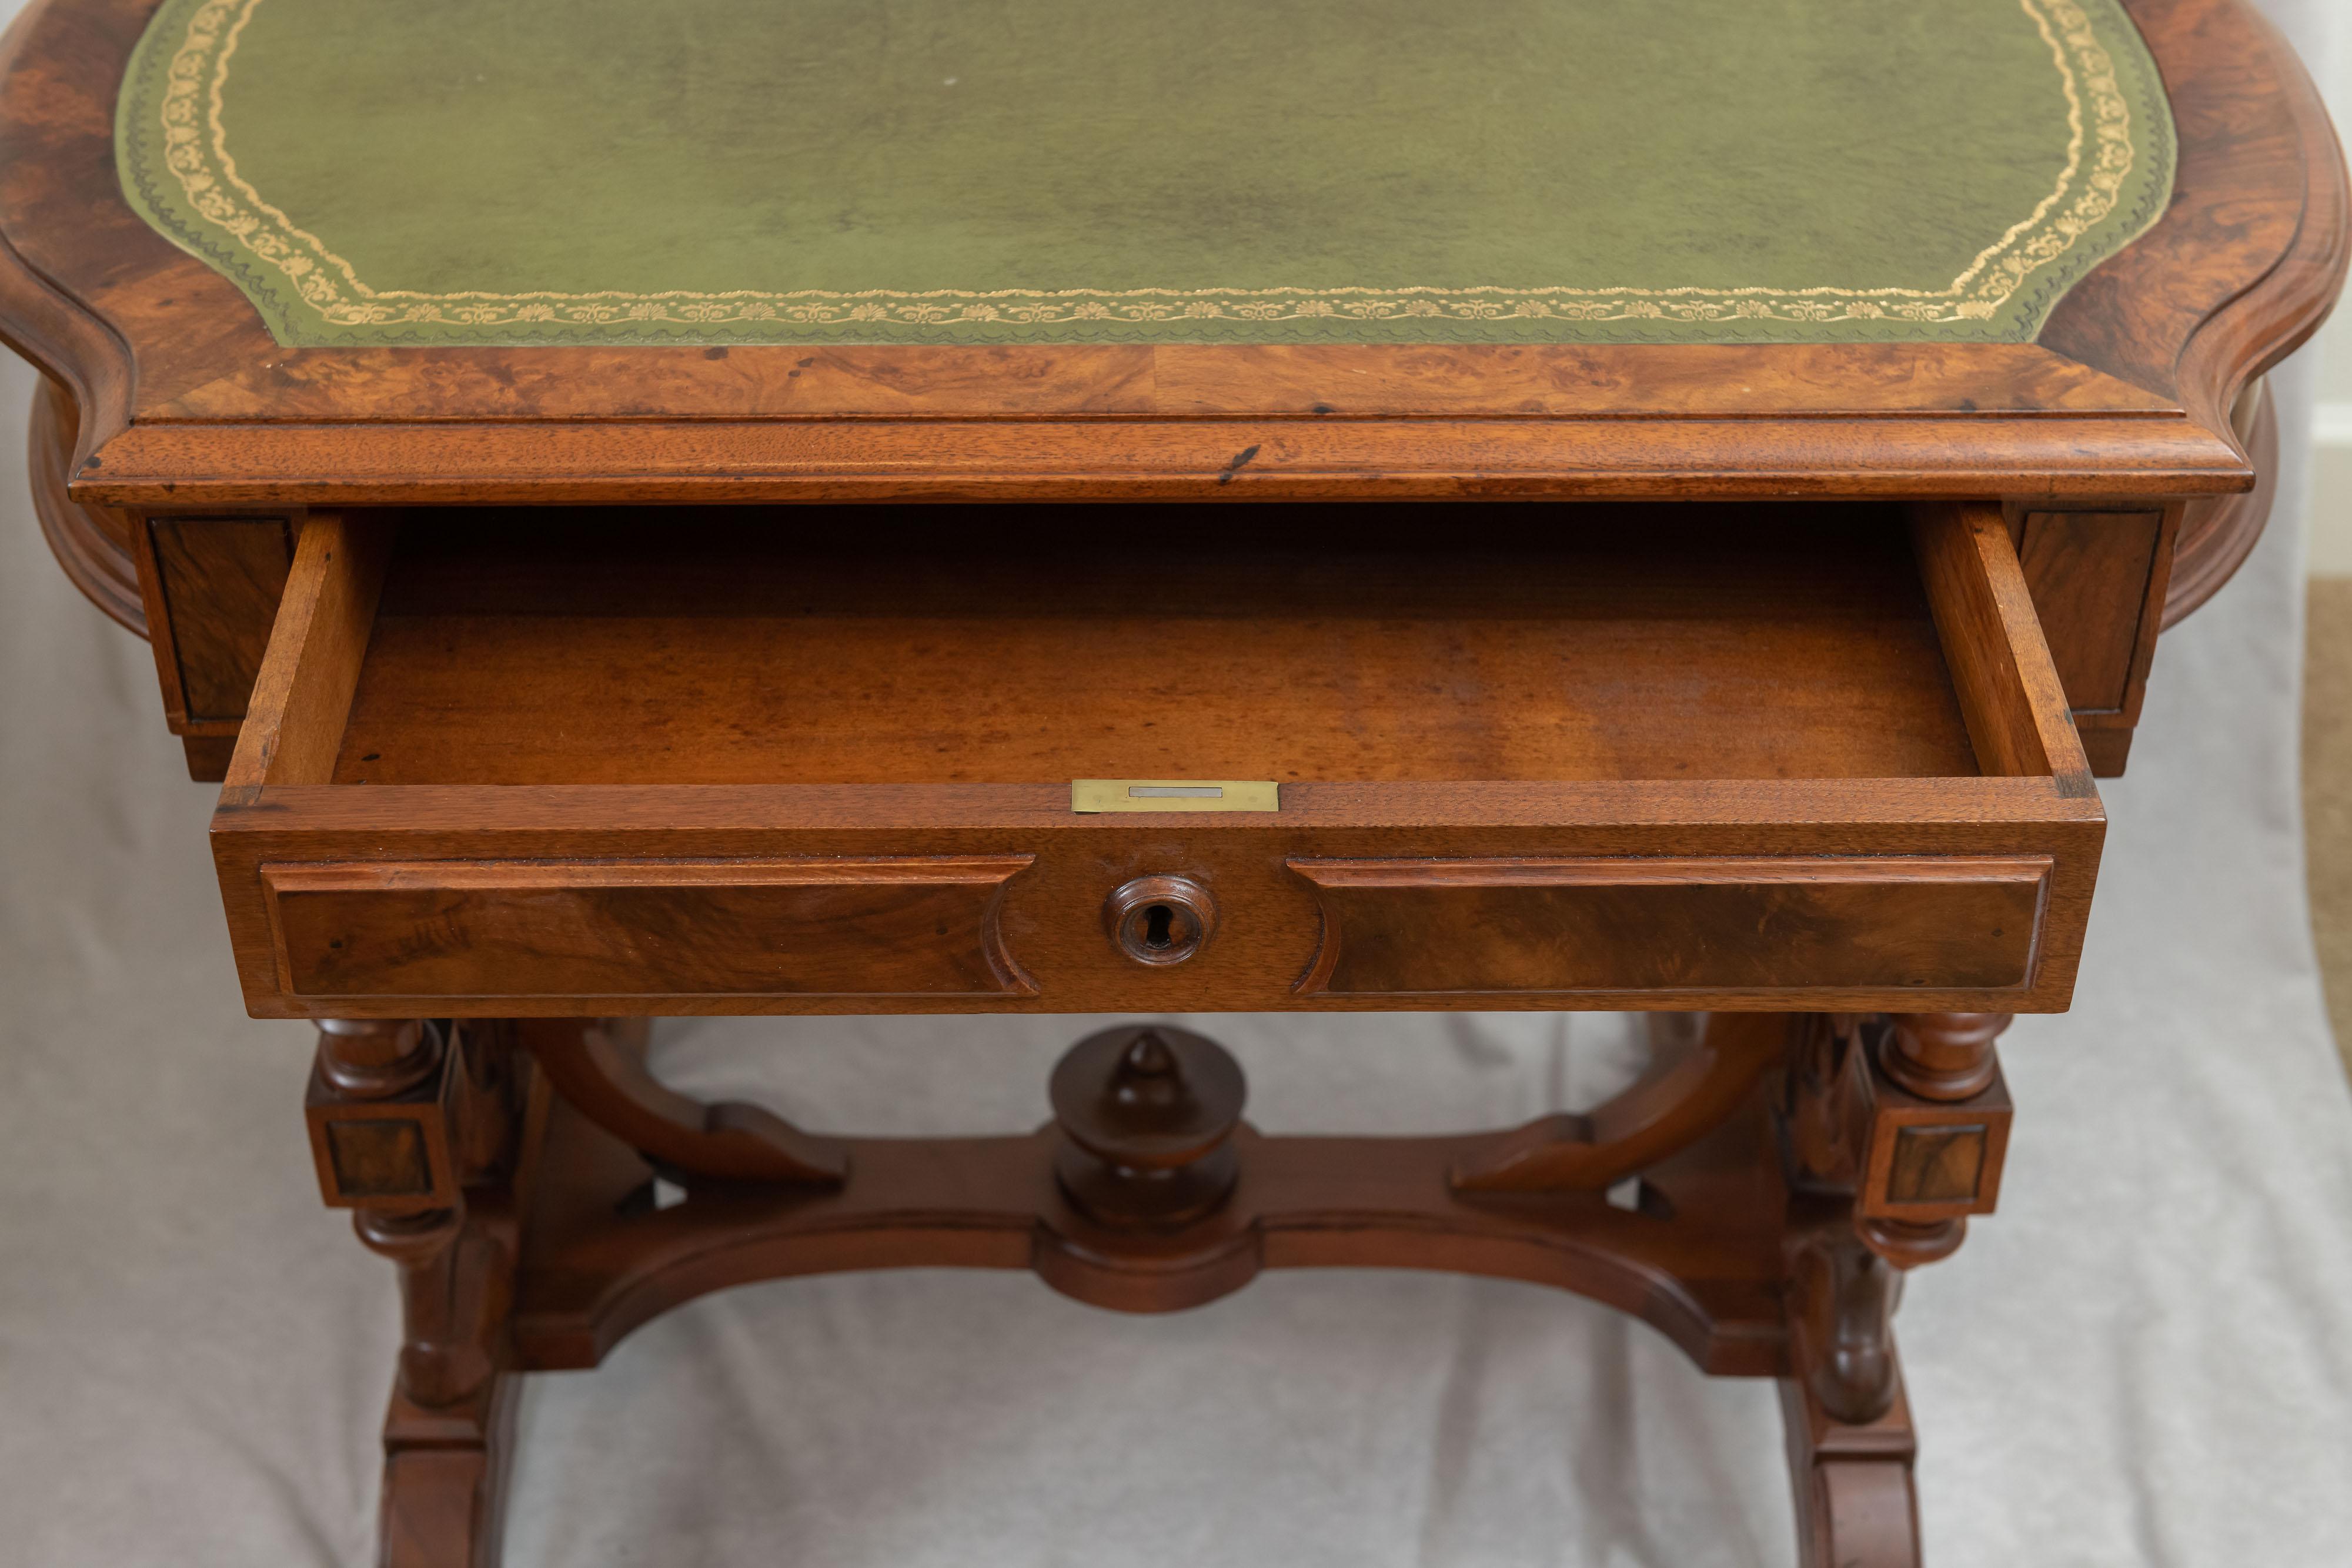 Machine-Made Renaissance Revival Walnut & Burl Writing Table w/ Leather Top, ca. 1870